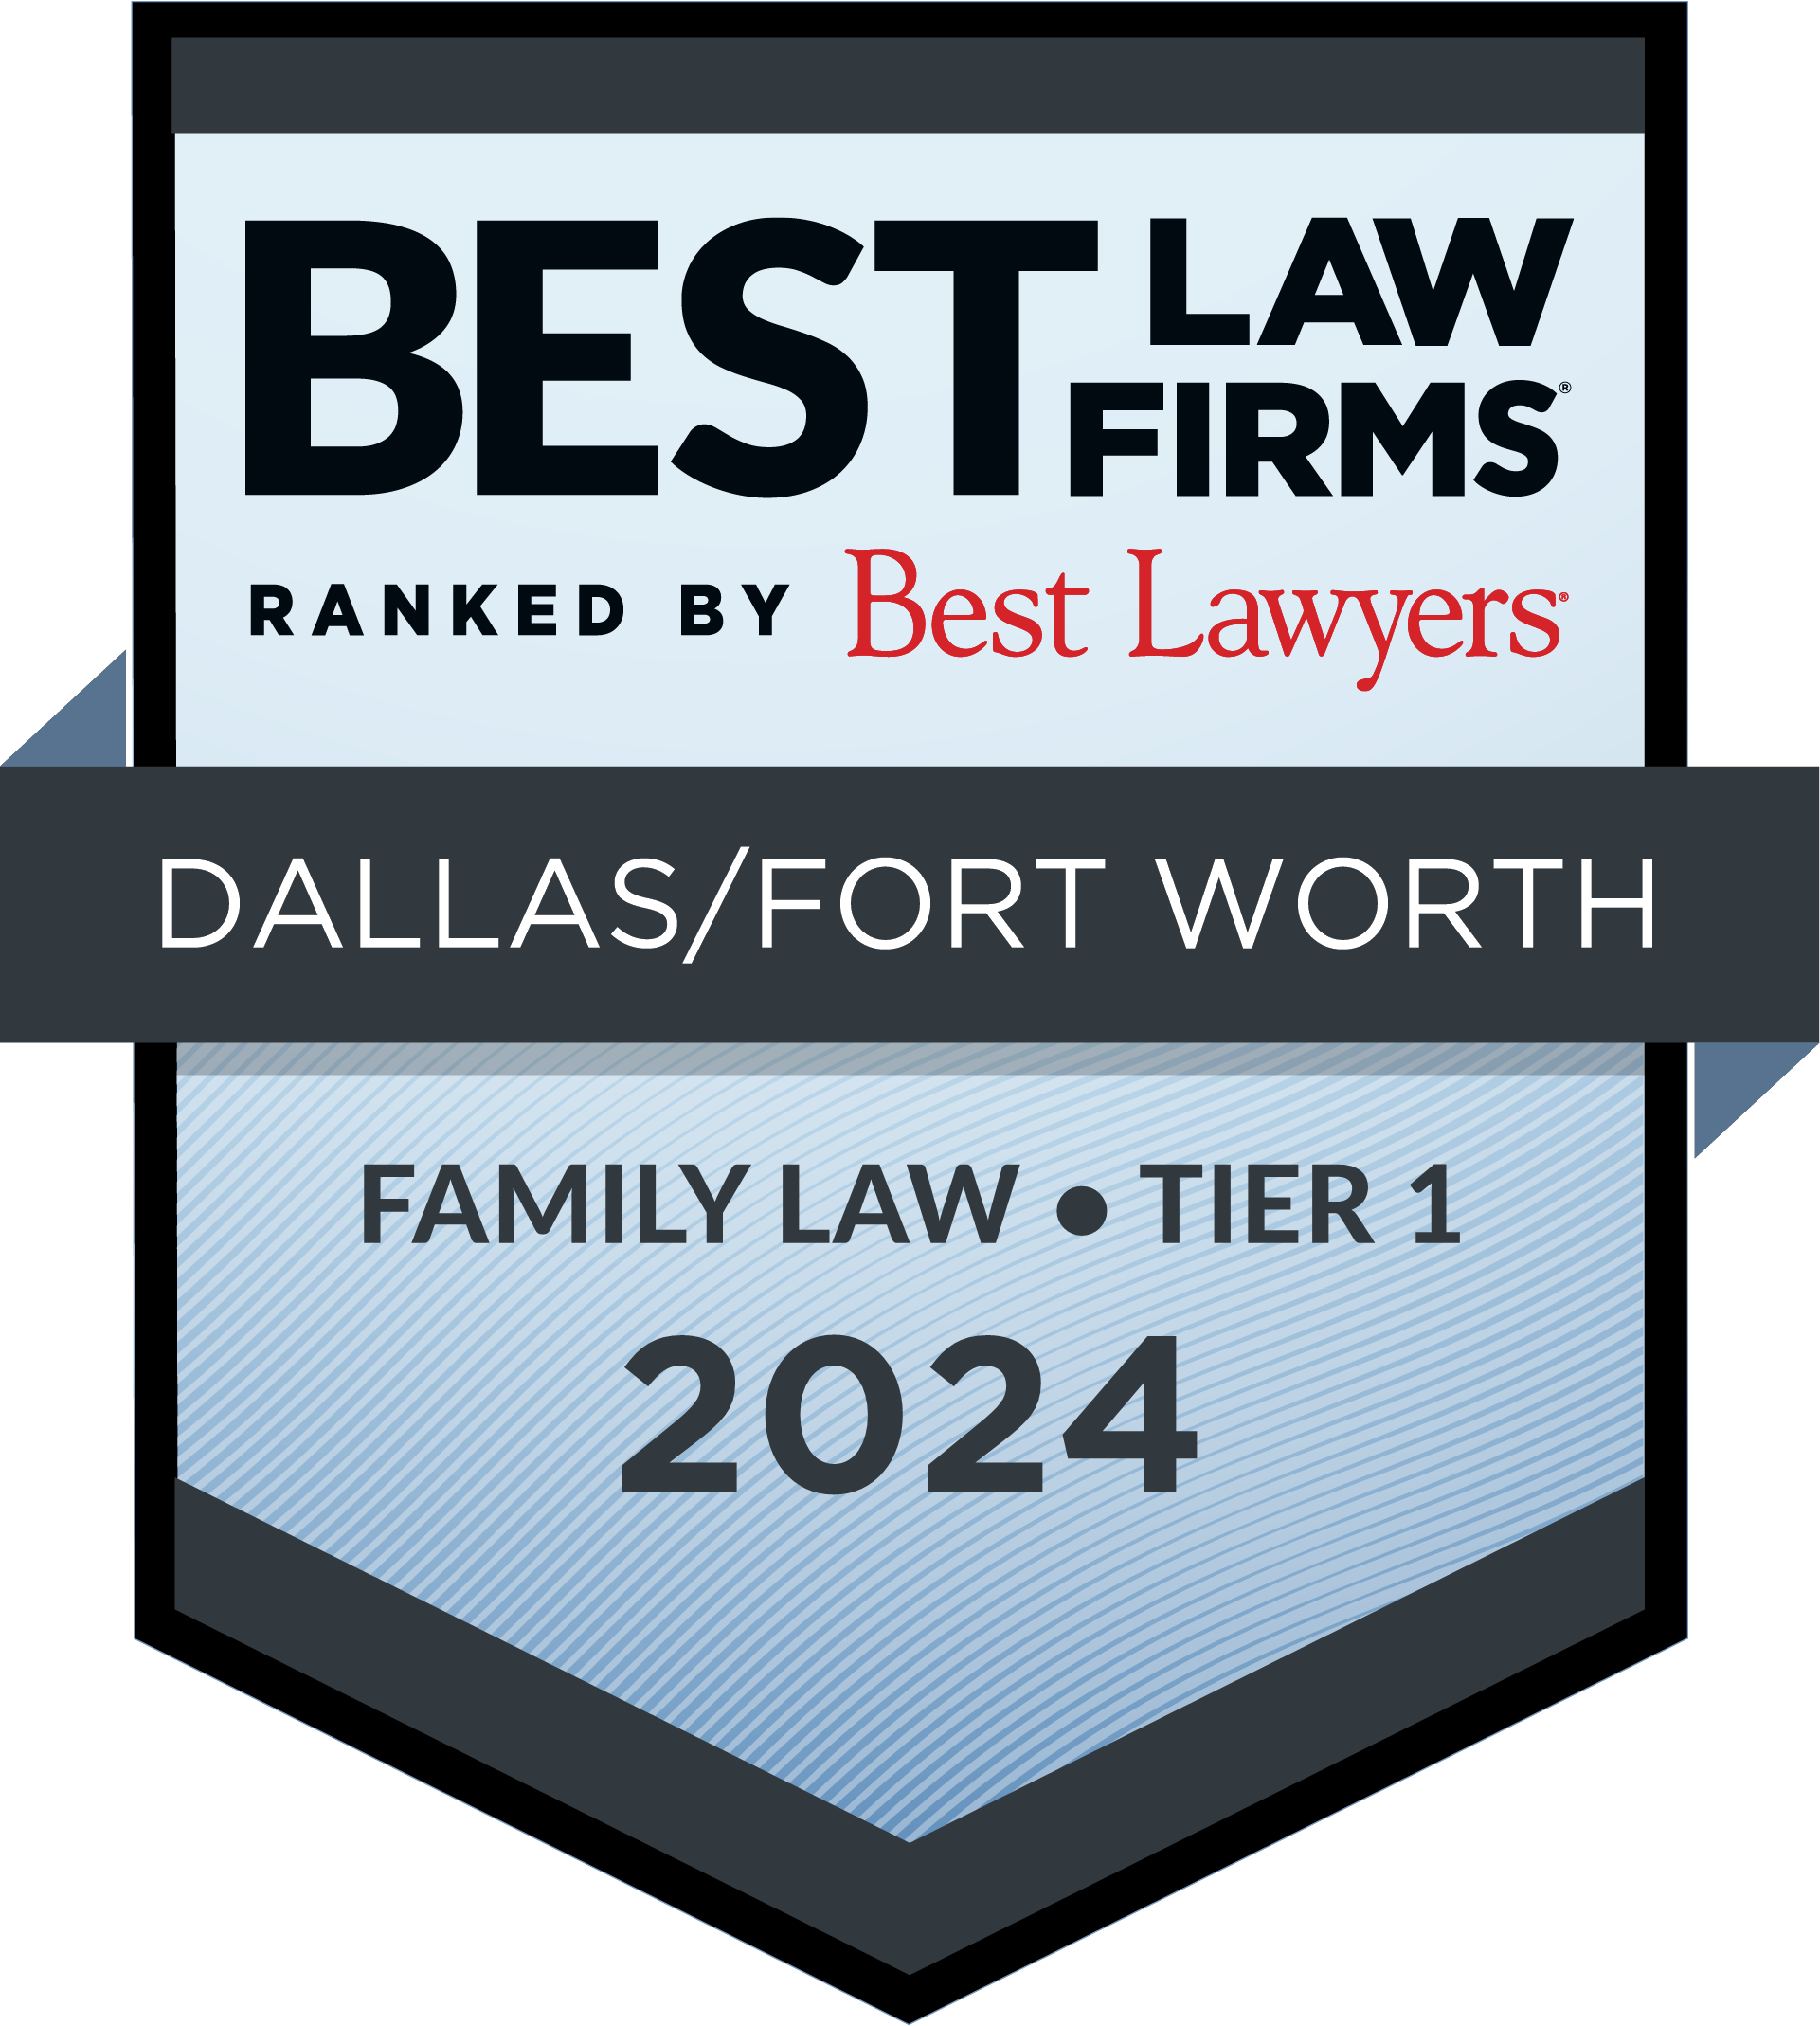 Award Badge - Best Law Firms in Dallas/Fort Worth ranked by Best Lawyers